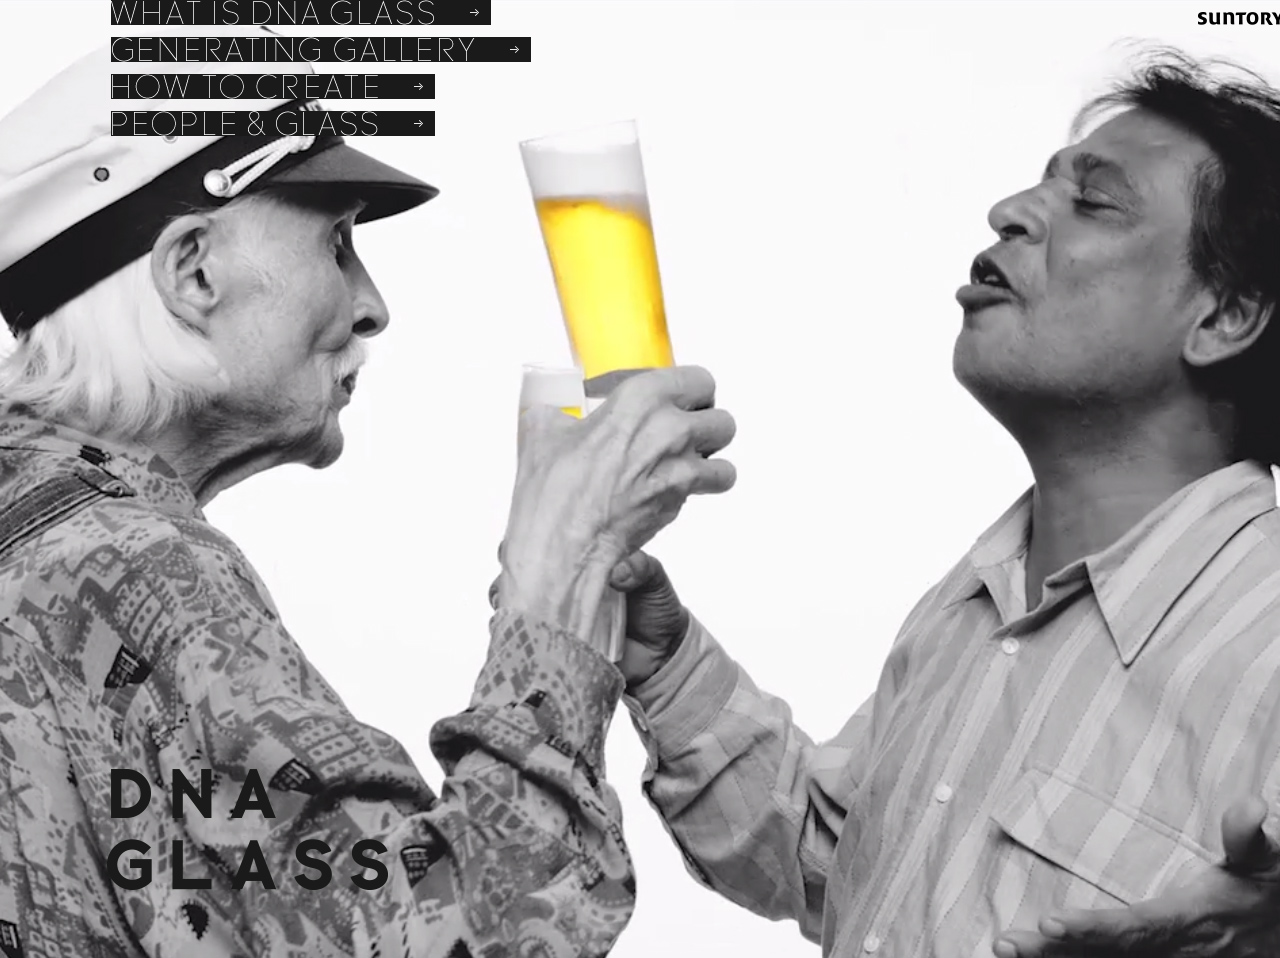 WHAT IS DNA GLASS / Suntory DNA GLASS – 遺伝子がうまいと叫ぶ一杯を。